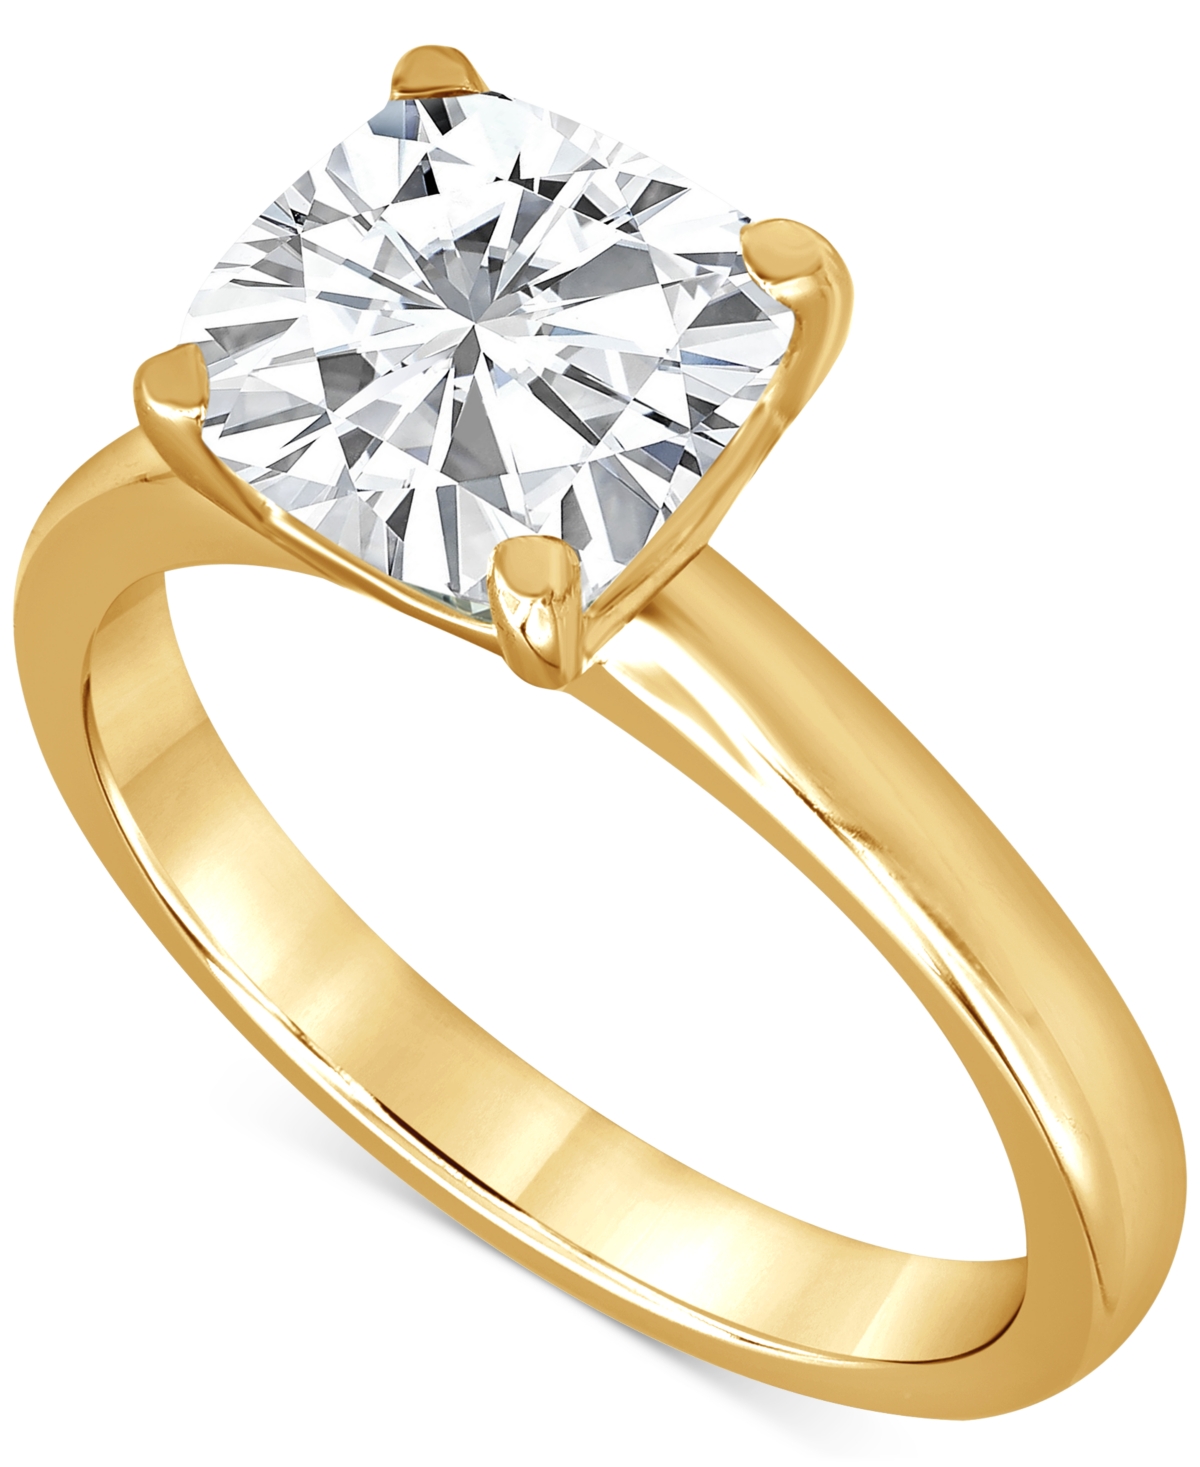 Badgley Mischka Certified Lab Grown Diamond Cushion-Cut Solitaire Engagement Ring in 14k Gold